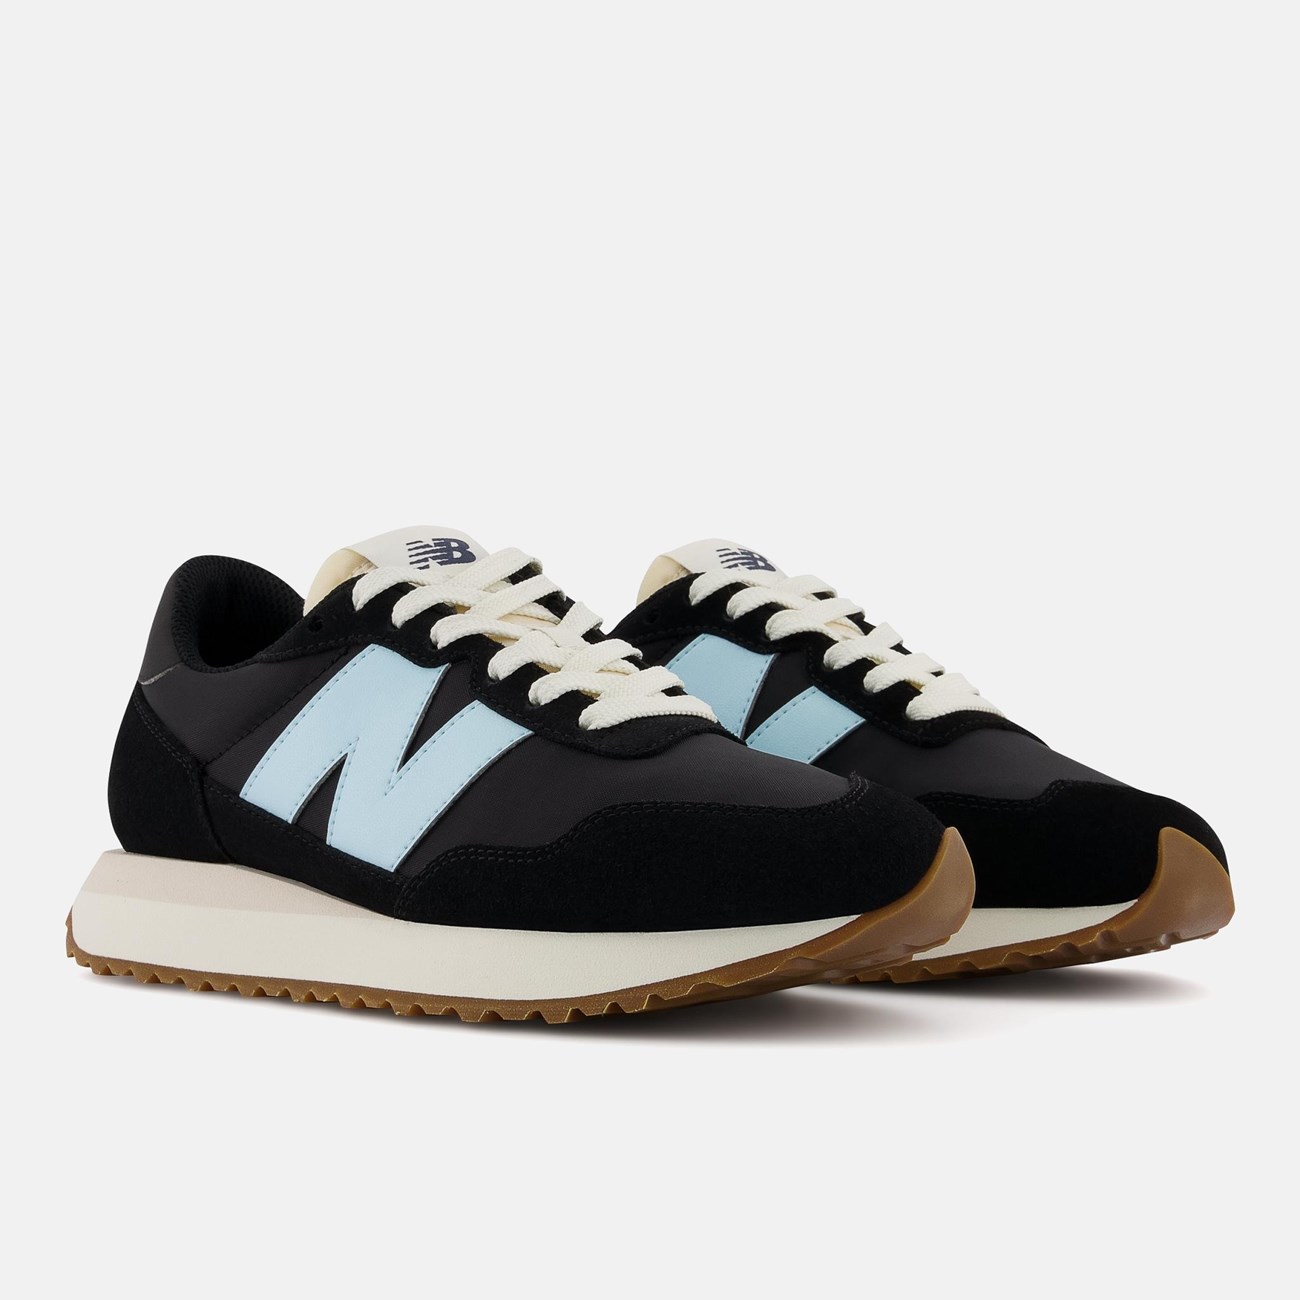 NEW BALANCE Γυναικεία Sneakers 237 WS237-GD - The Athlete's Foot